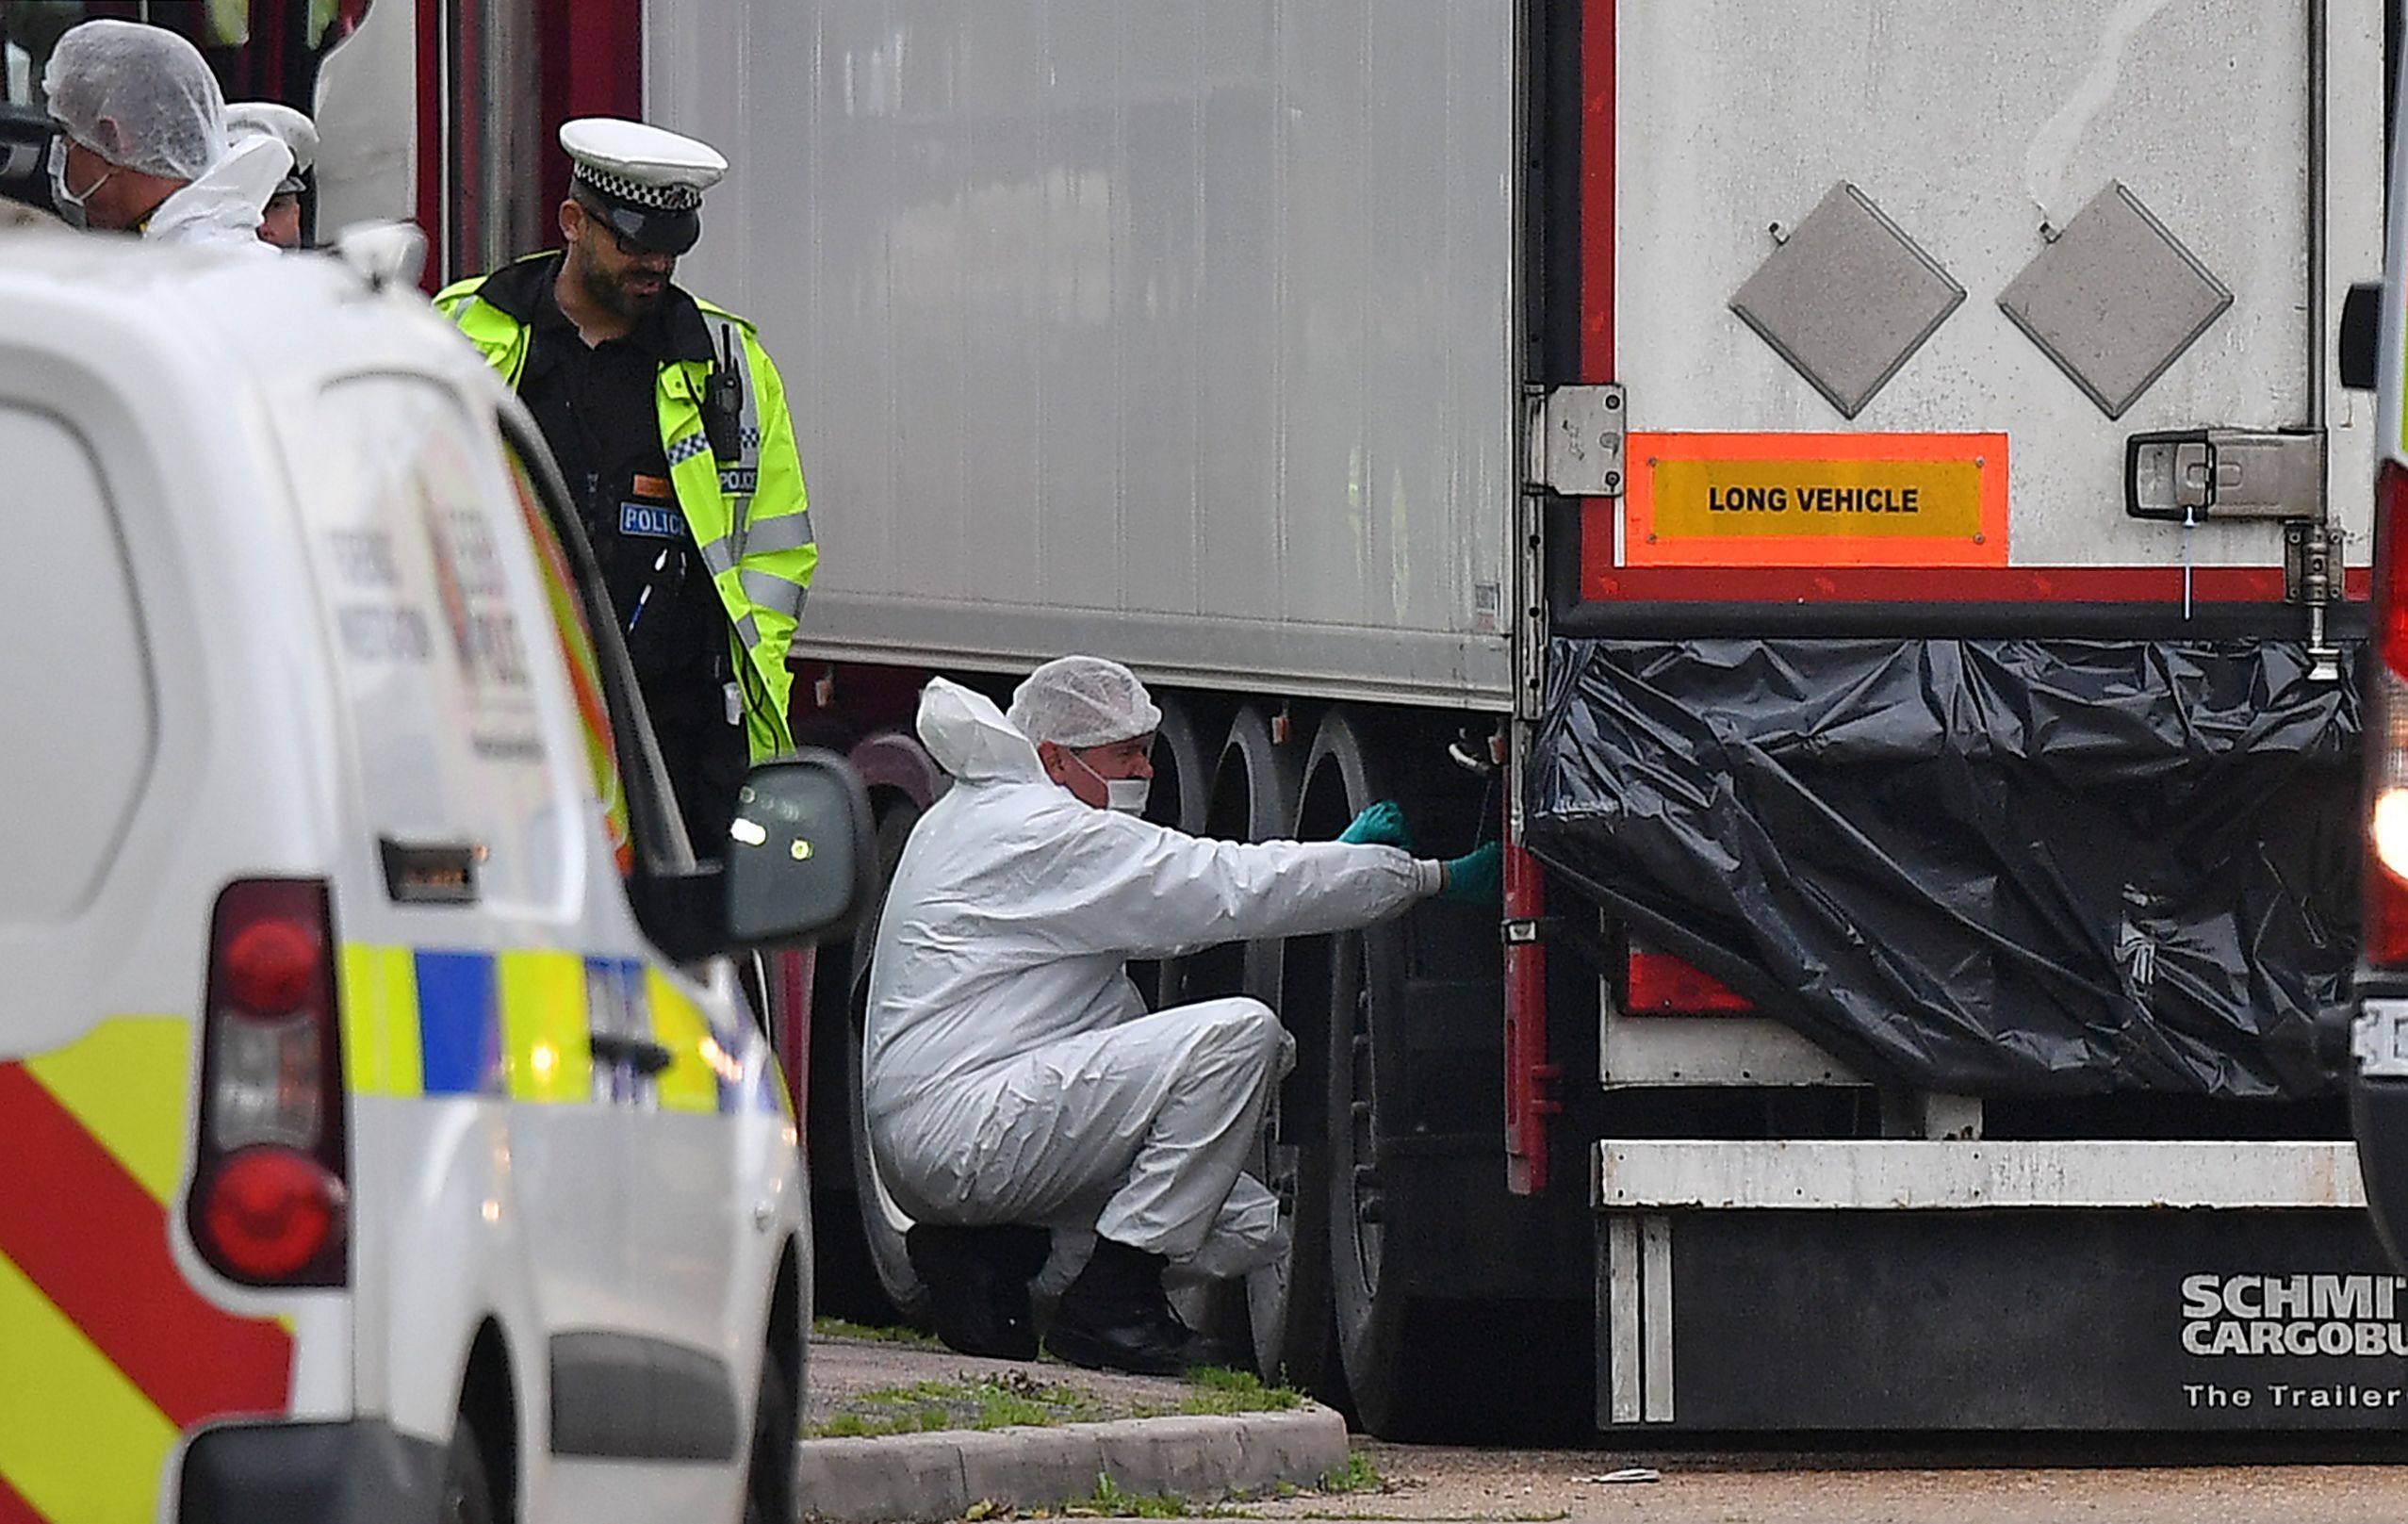 UK forensics officers work on a lorry, found to be containing the dead bodies of 39 Vietnamese migrants, at an industrial park near London in October 2019. Photo: AFP